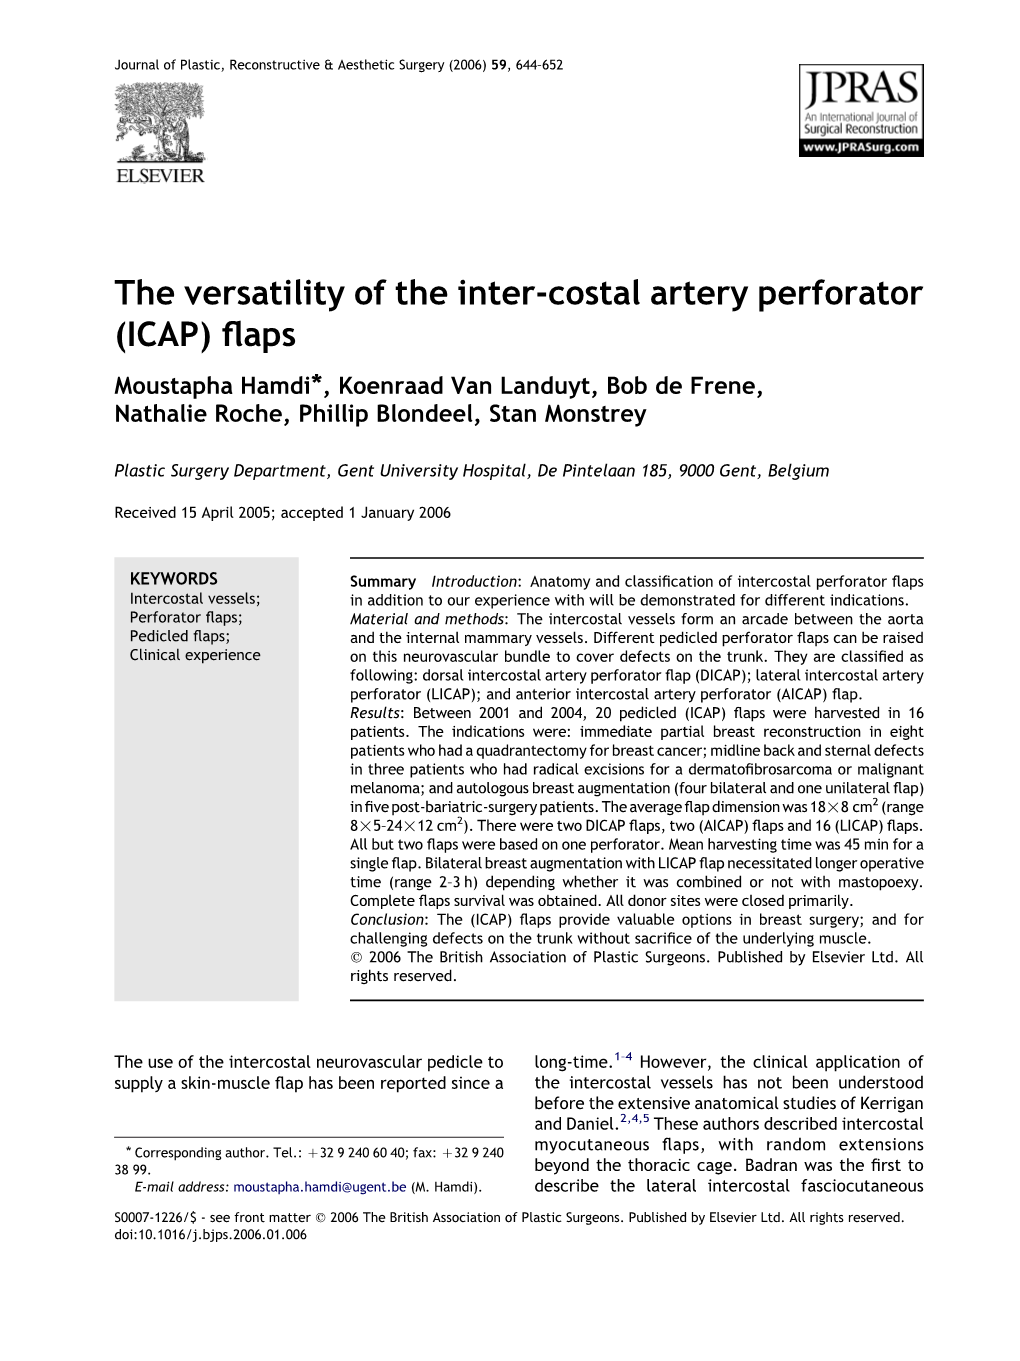 The Versatility of the Inter-Costal Artery Perforator (ICAP) Flaps